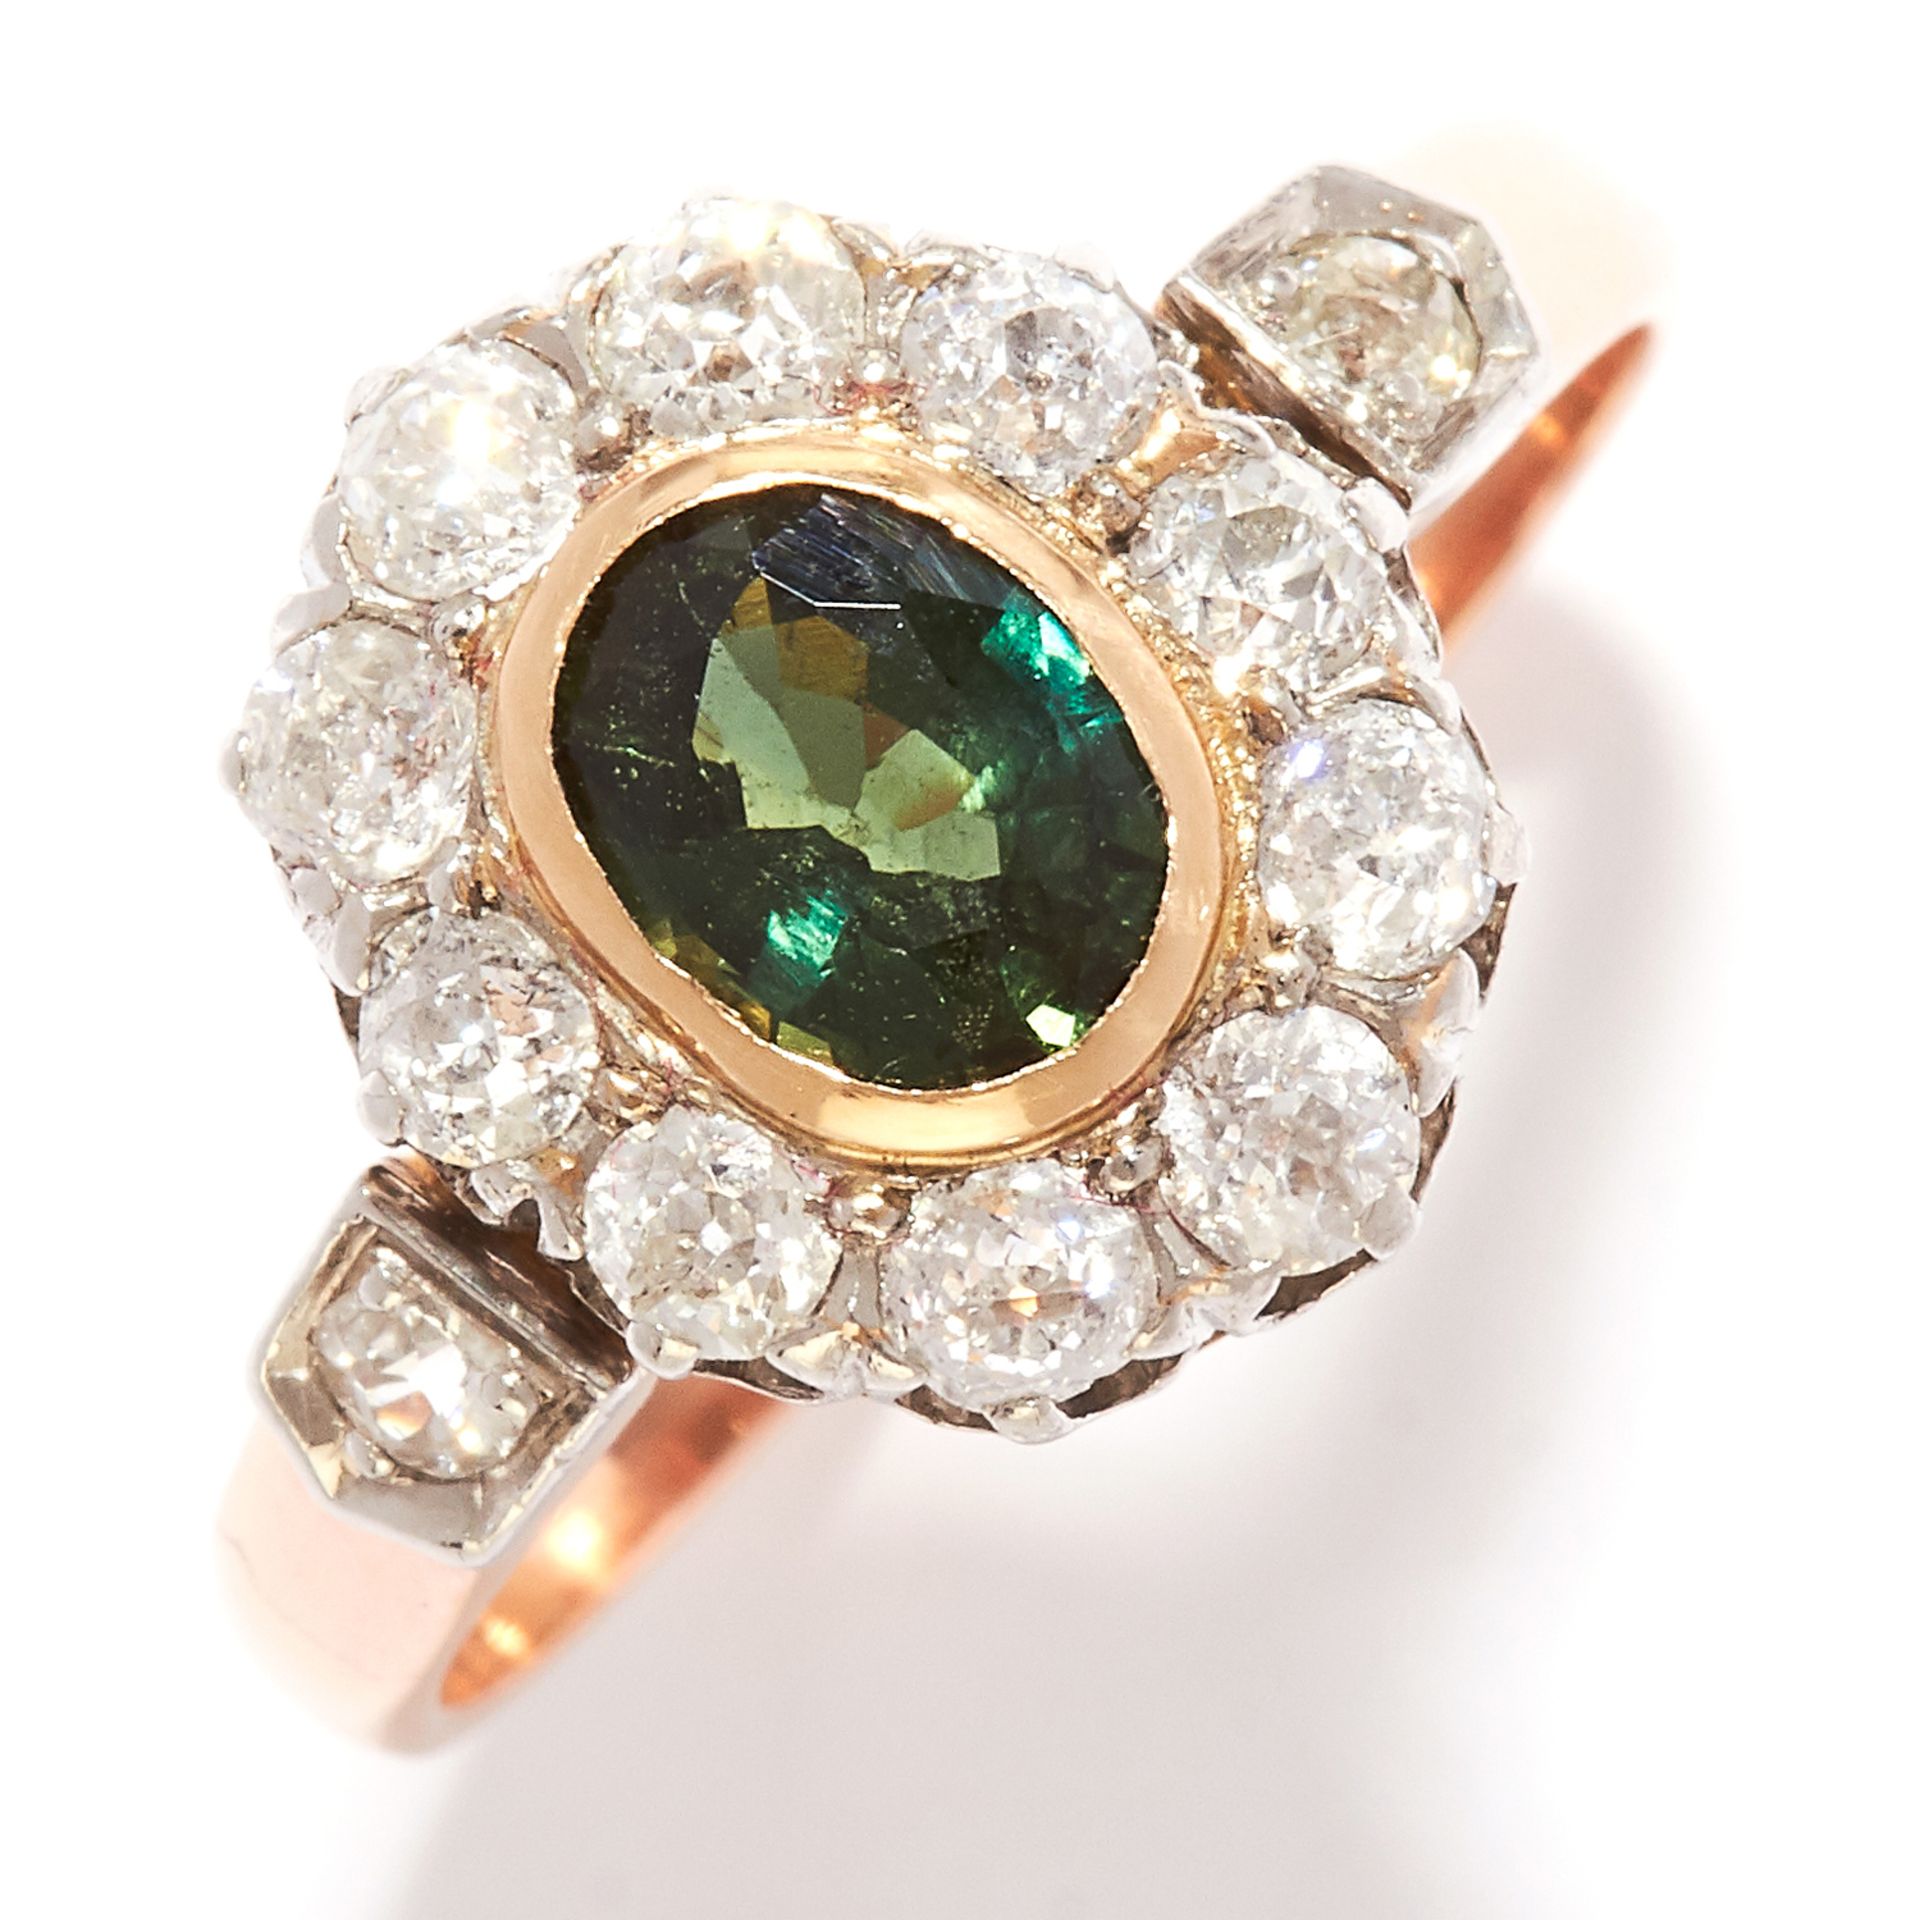 GREEN SAPPHIRE AND DIAMOND CLUSTER RING in yellow gold, set with an oval cut green sapphire in a